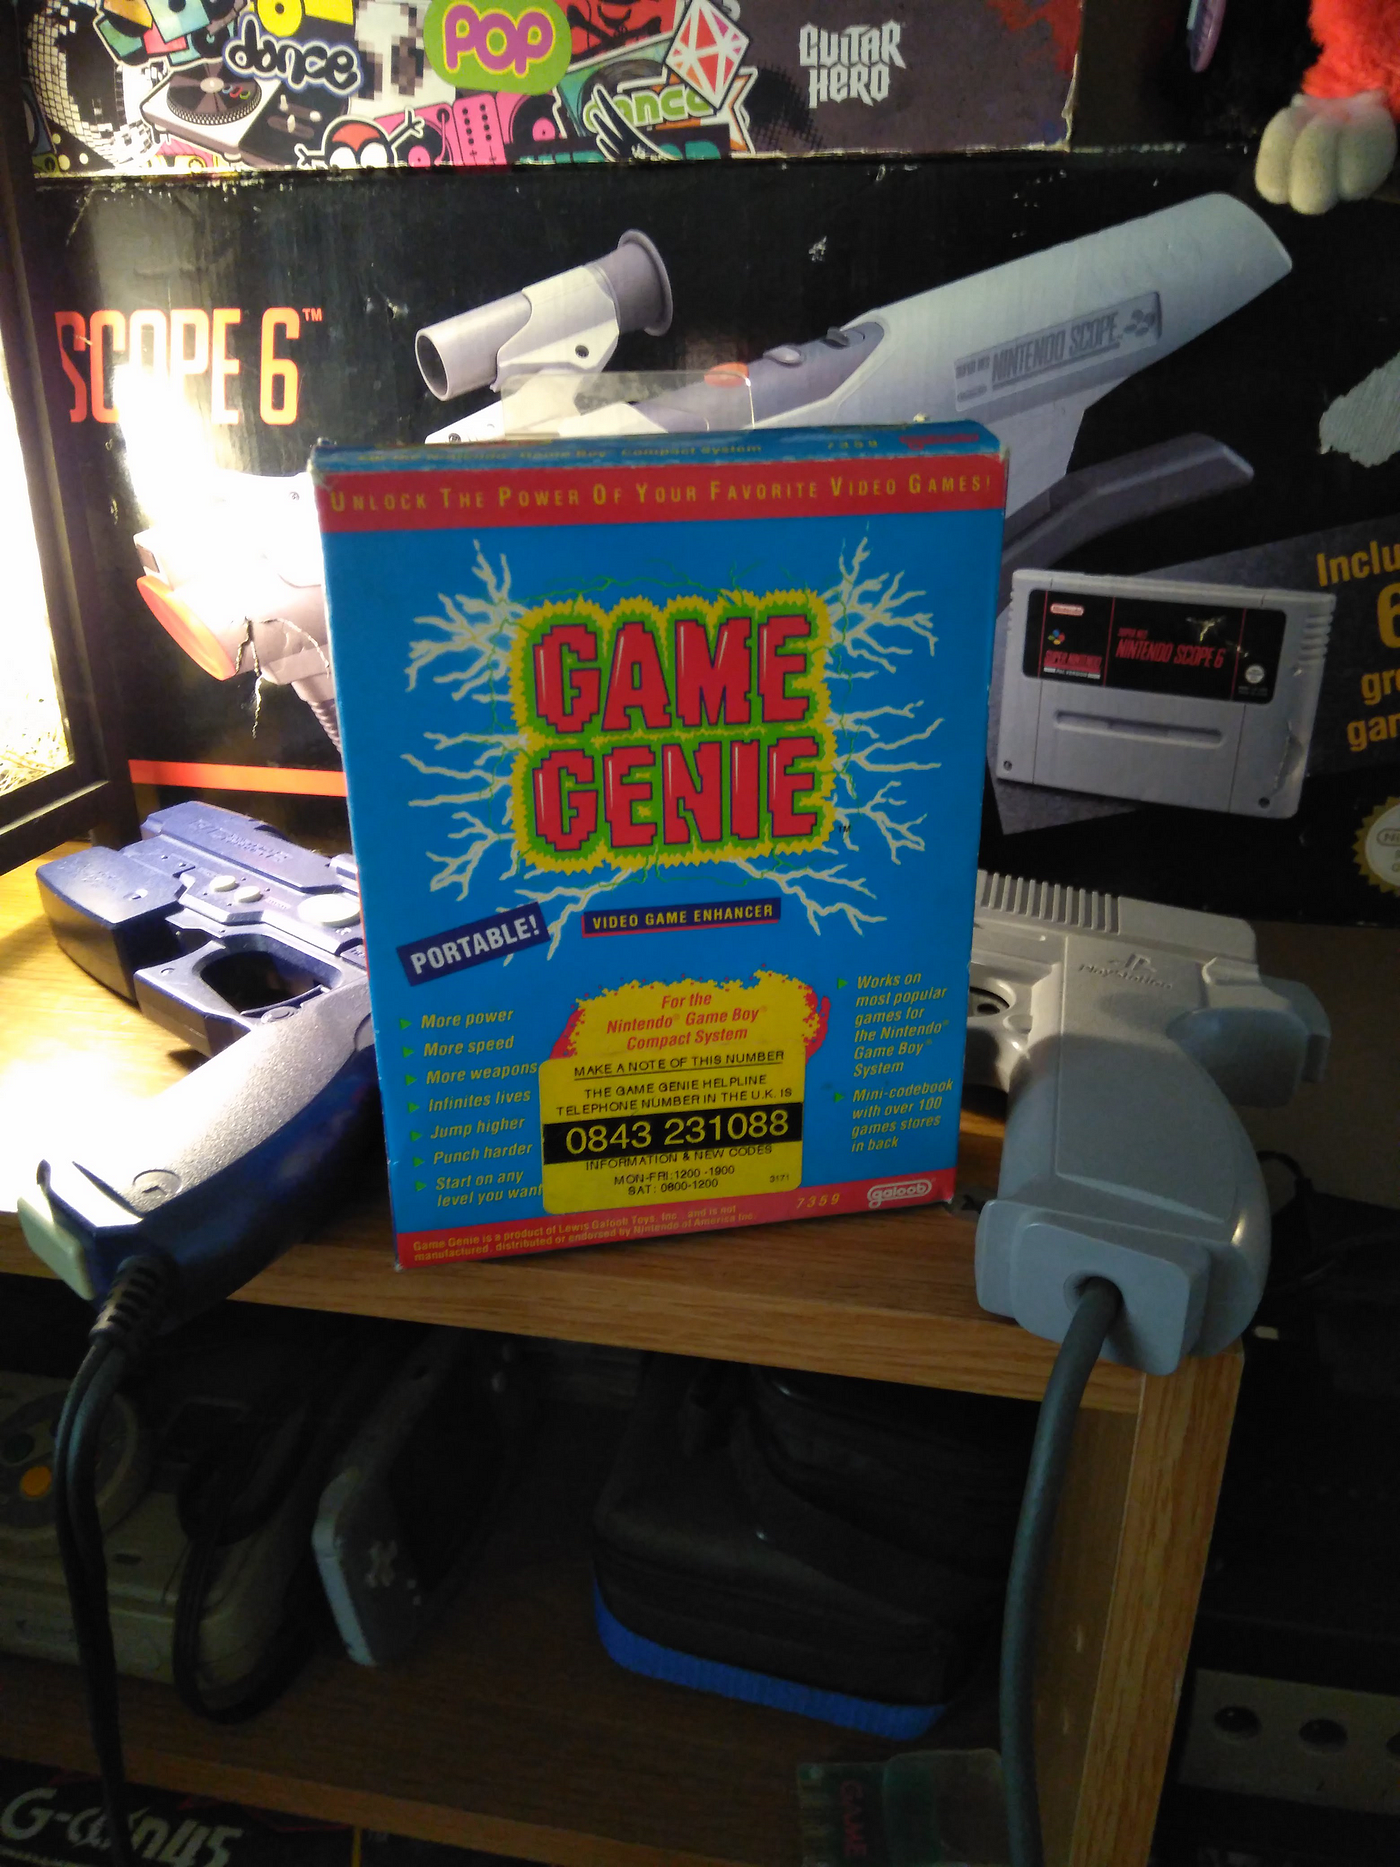 The Story Of The Game Genie, The Cheat Device Nintendo Tried (And Failed)  To Kill